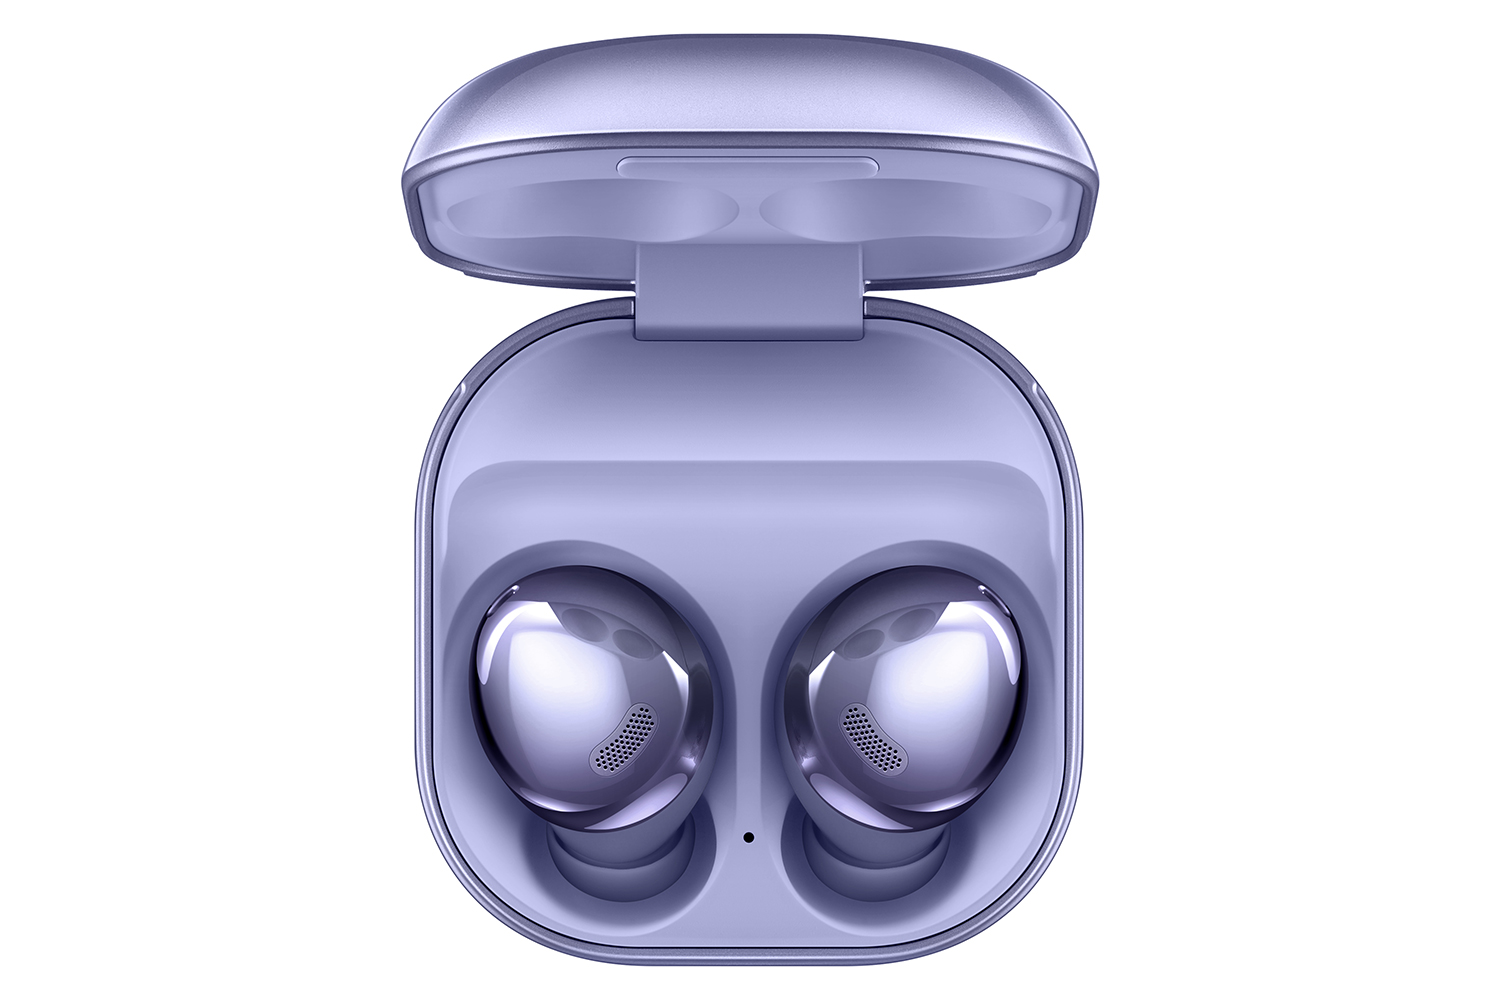 Galaxy Buds Pro in phantom violet inside the case from top view 